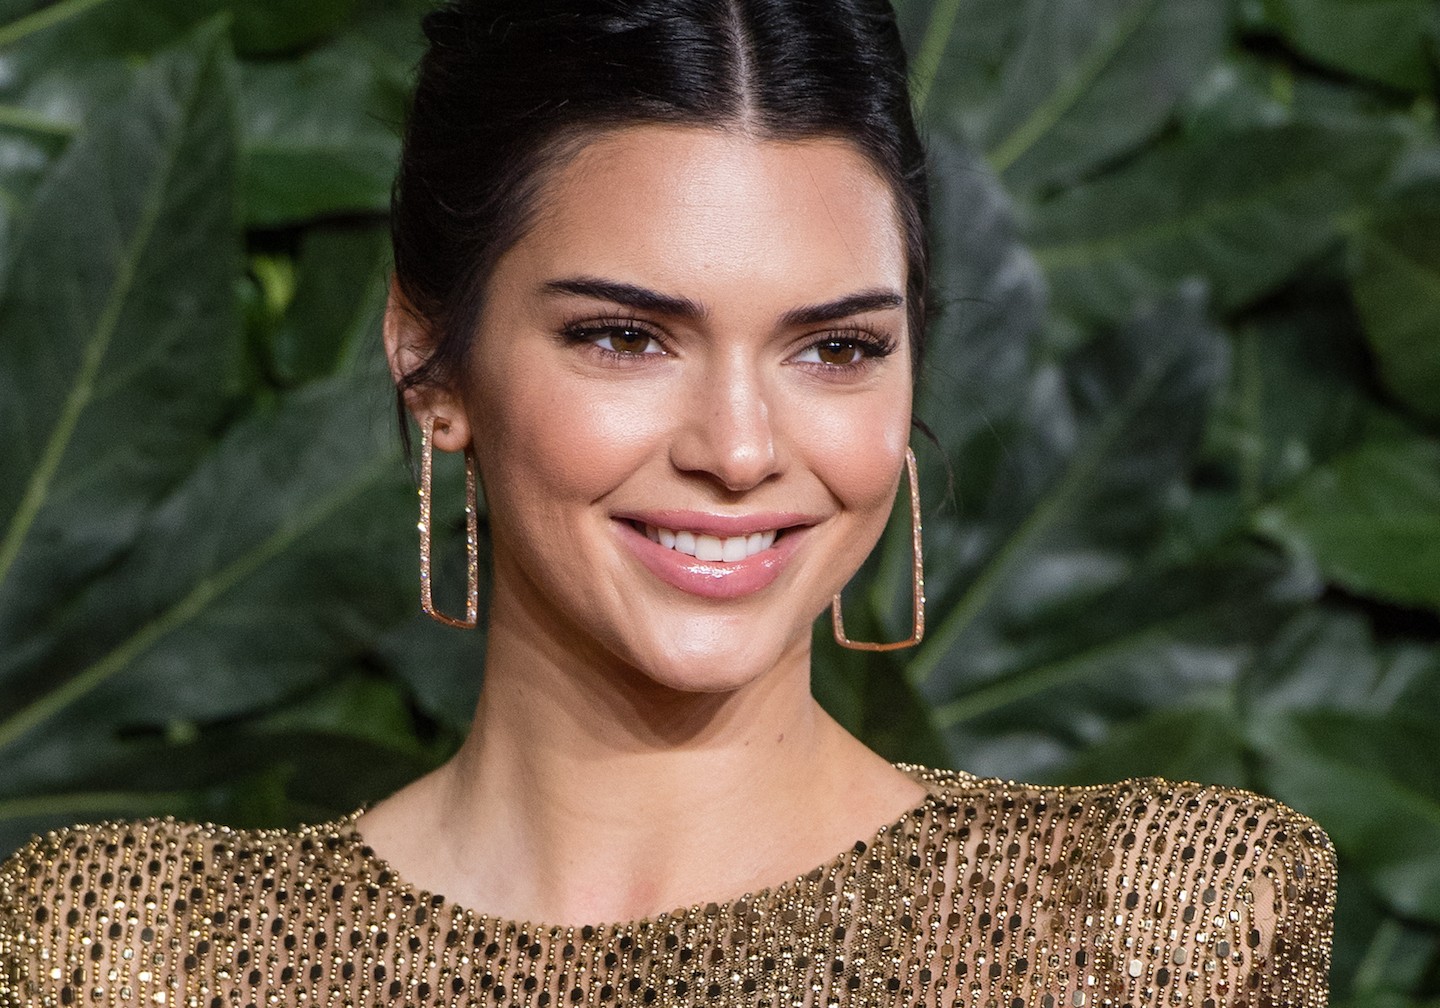 Highest-Paid Models 2018: Kendall Jenner Leads With $22.5 Million